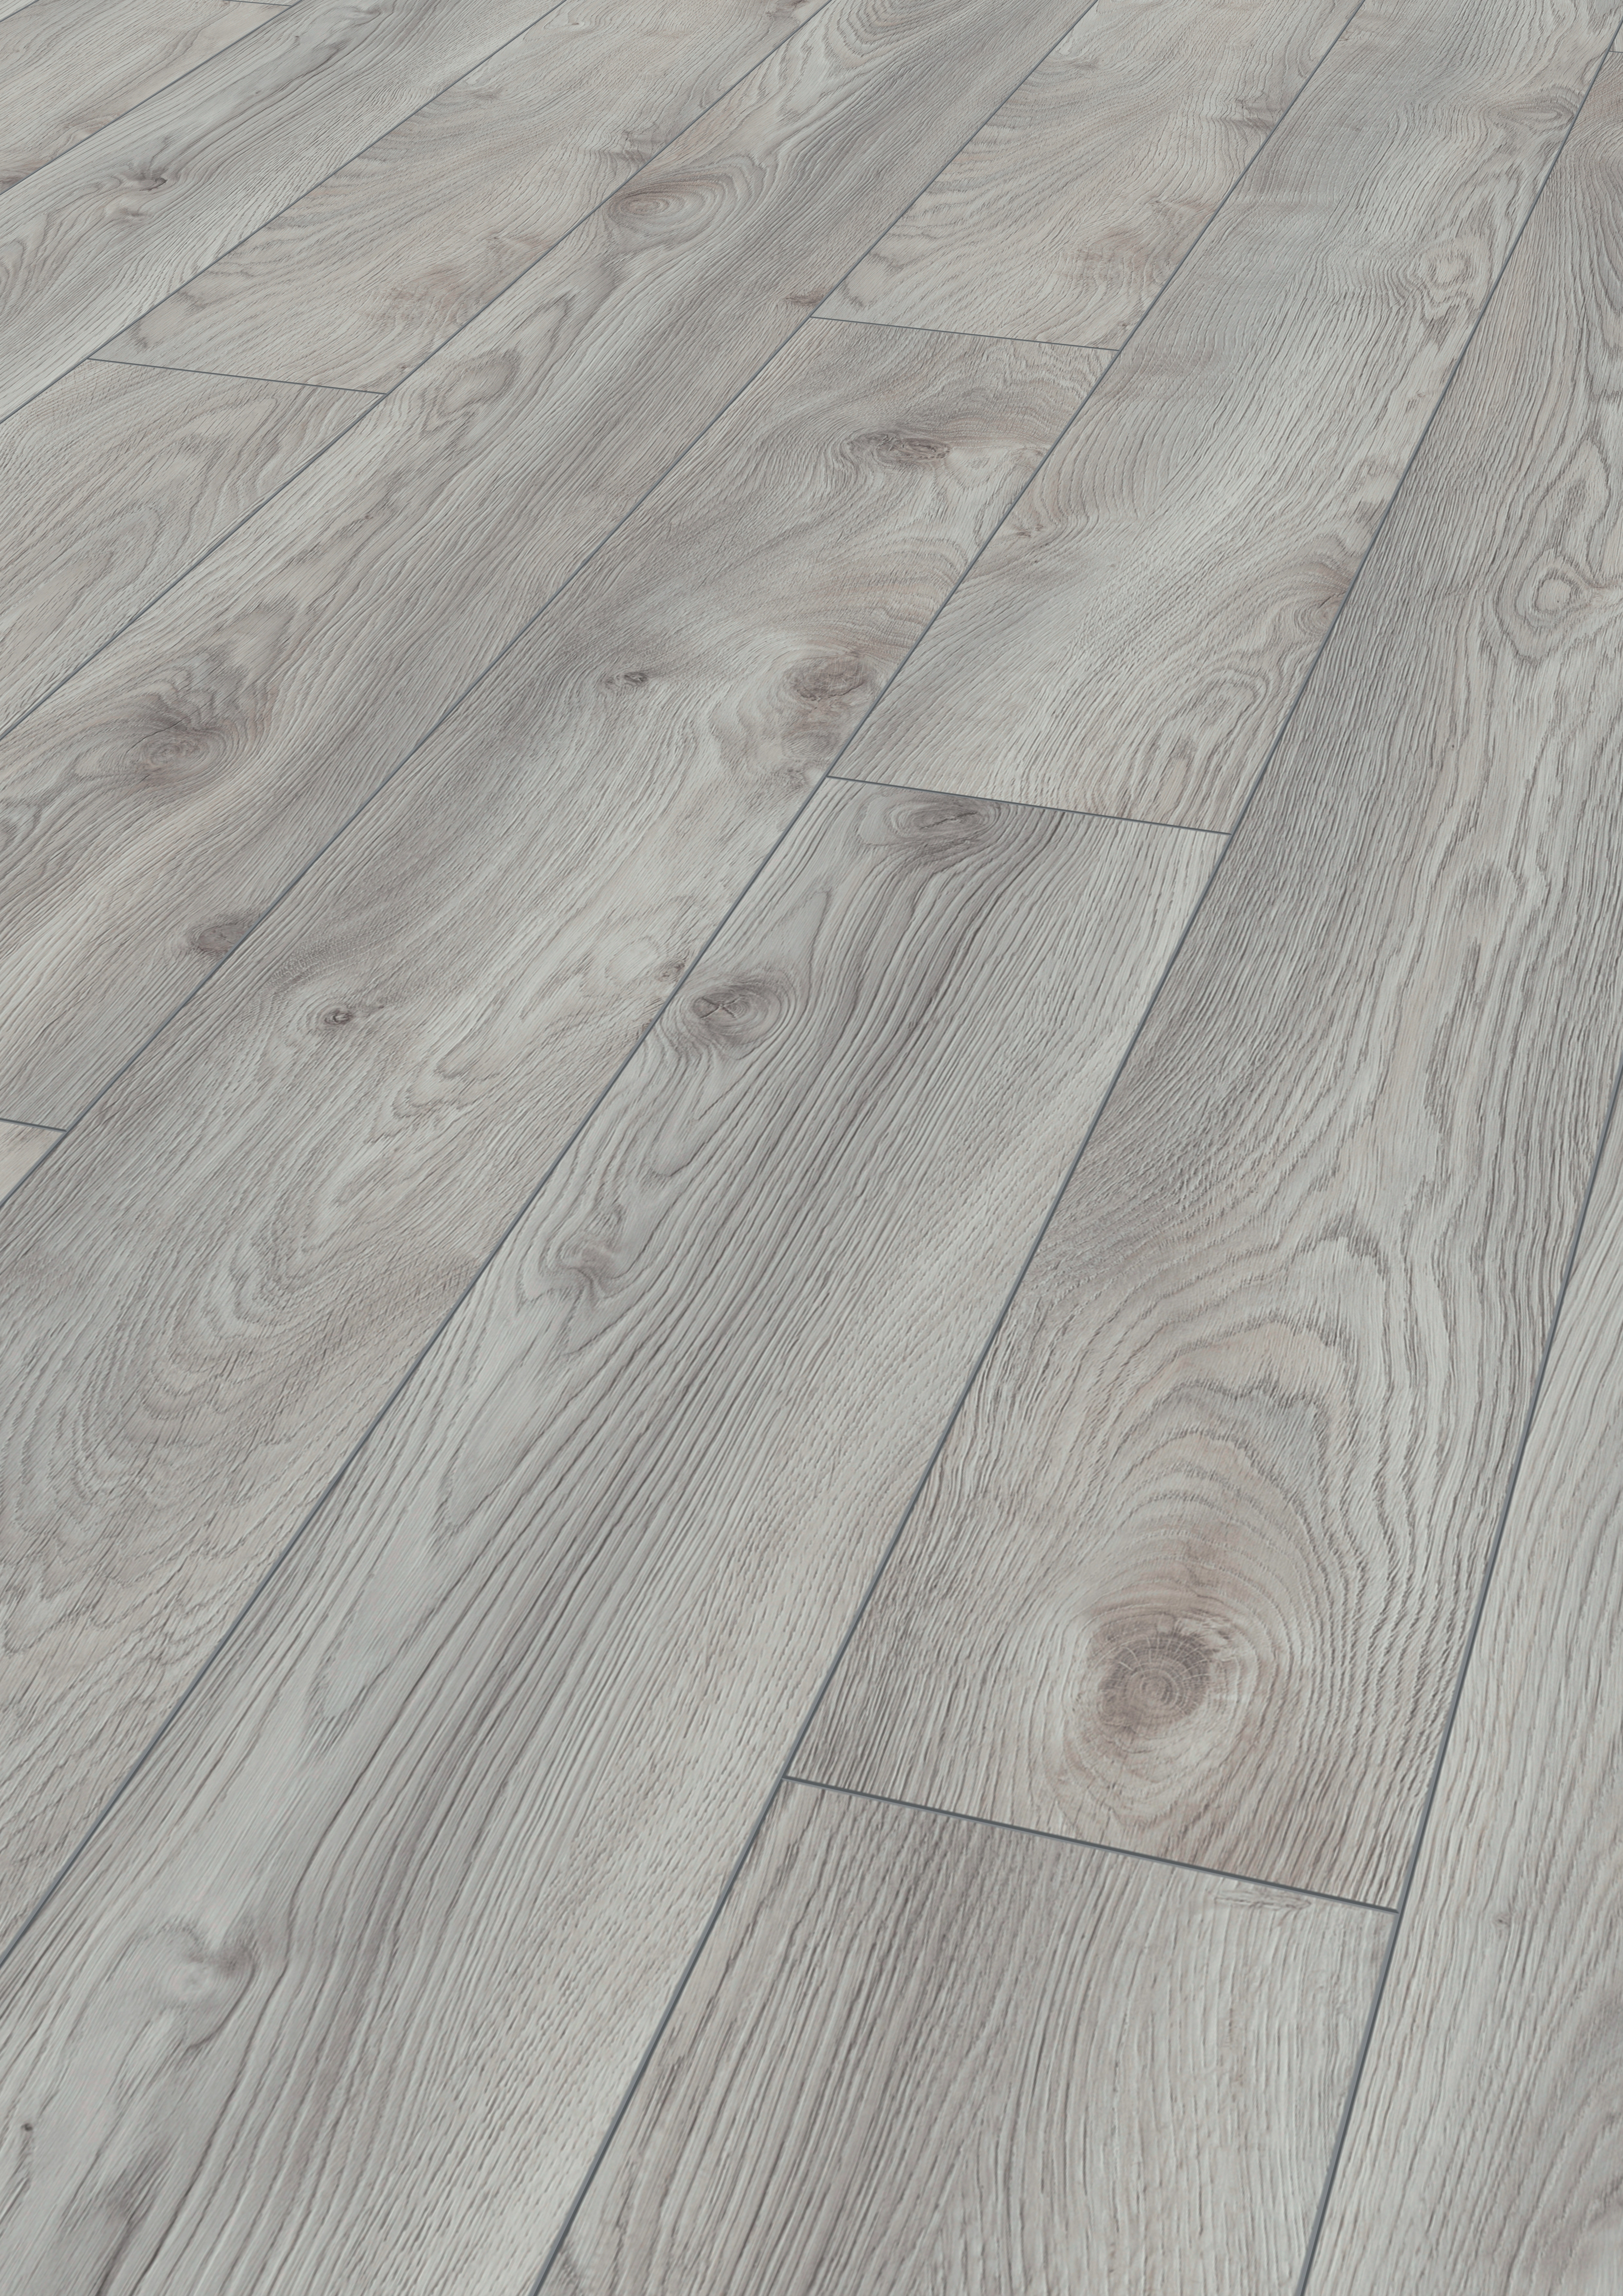 29 Wonderful Hardwood Flooring Gold Coast 2024 free download hardwood flooring gold coast of mammut laminate flooring in country house plank style kronotex regarding download picture amp